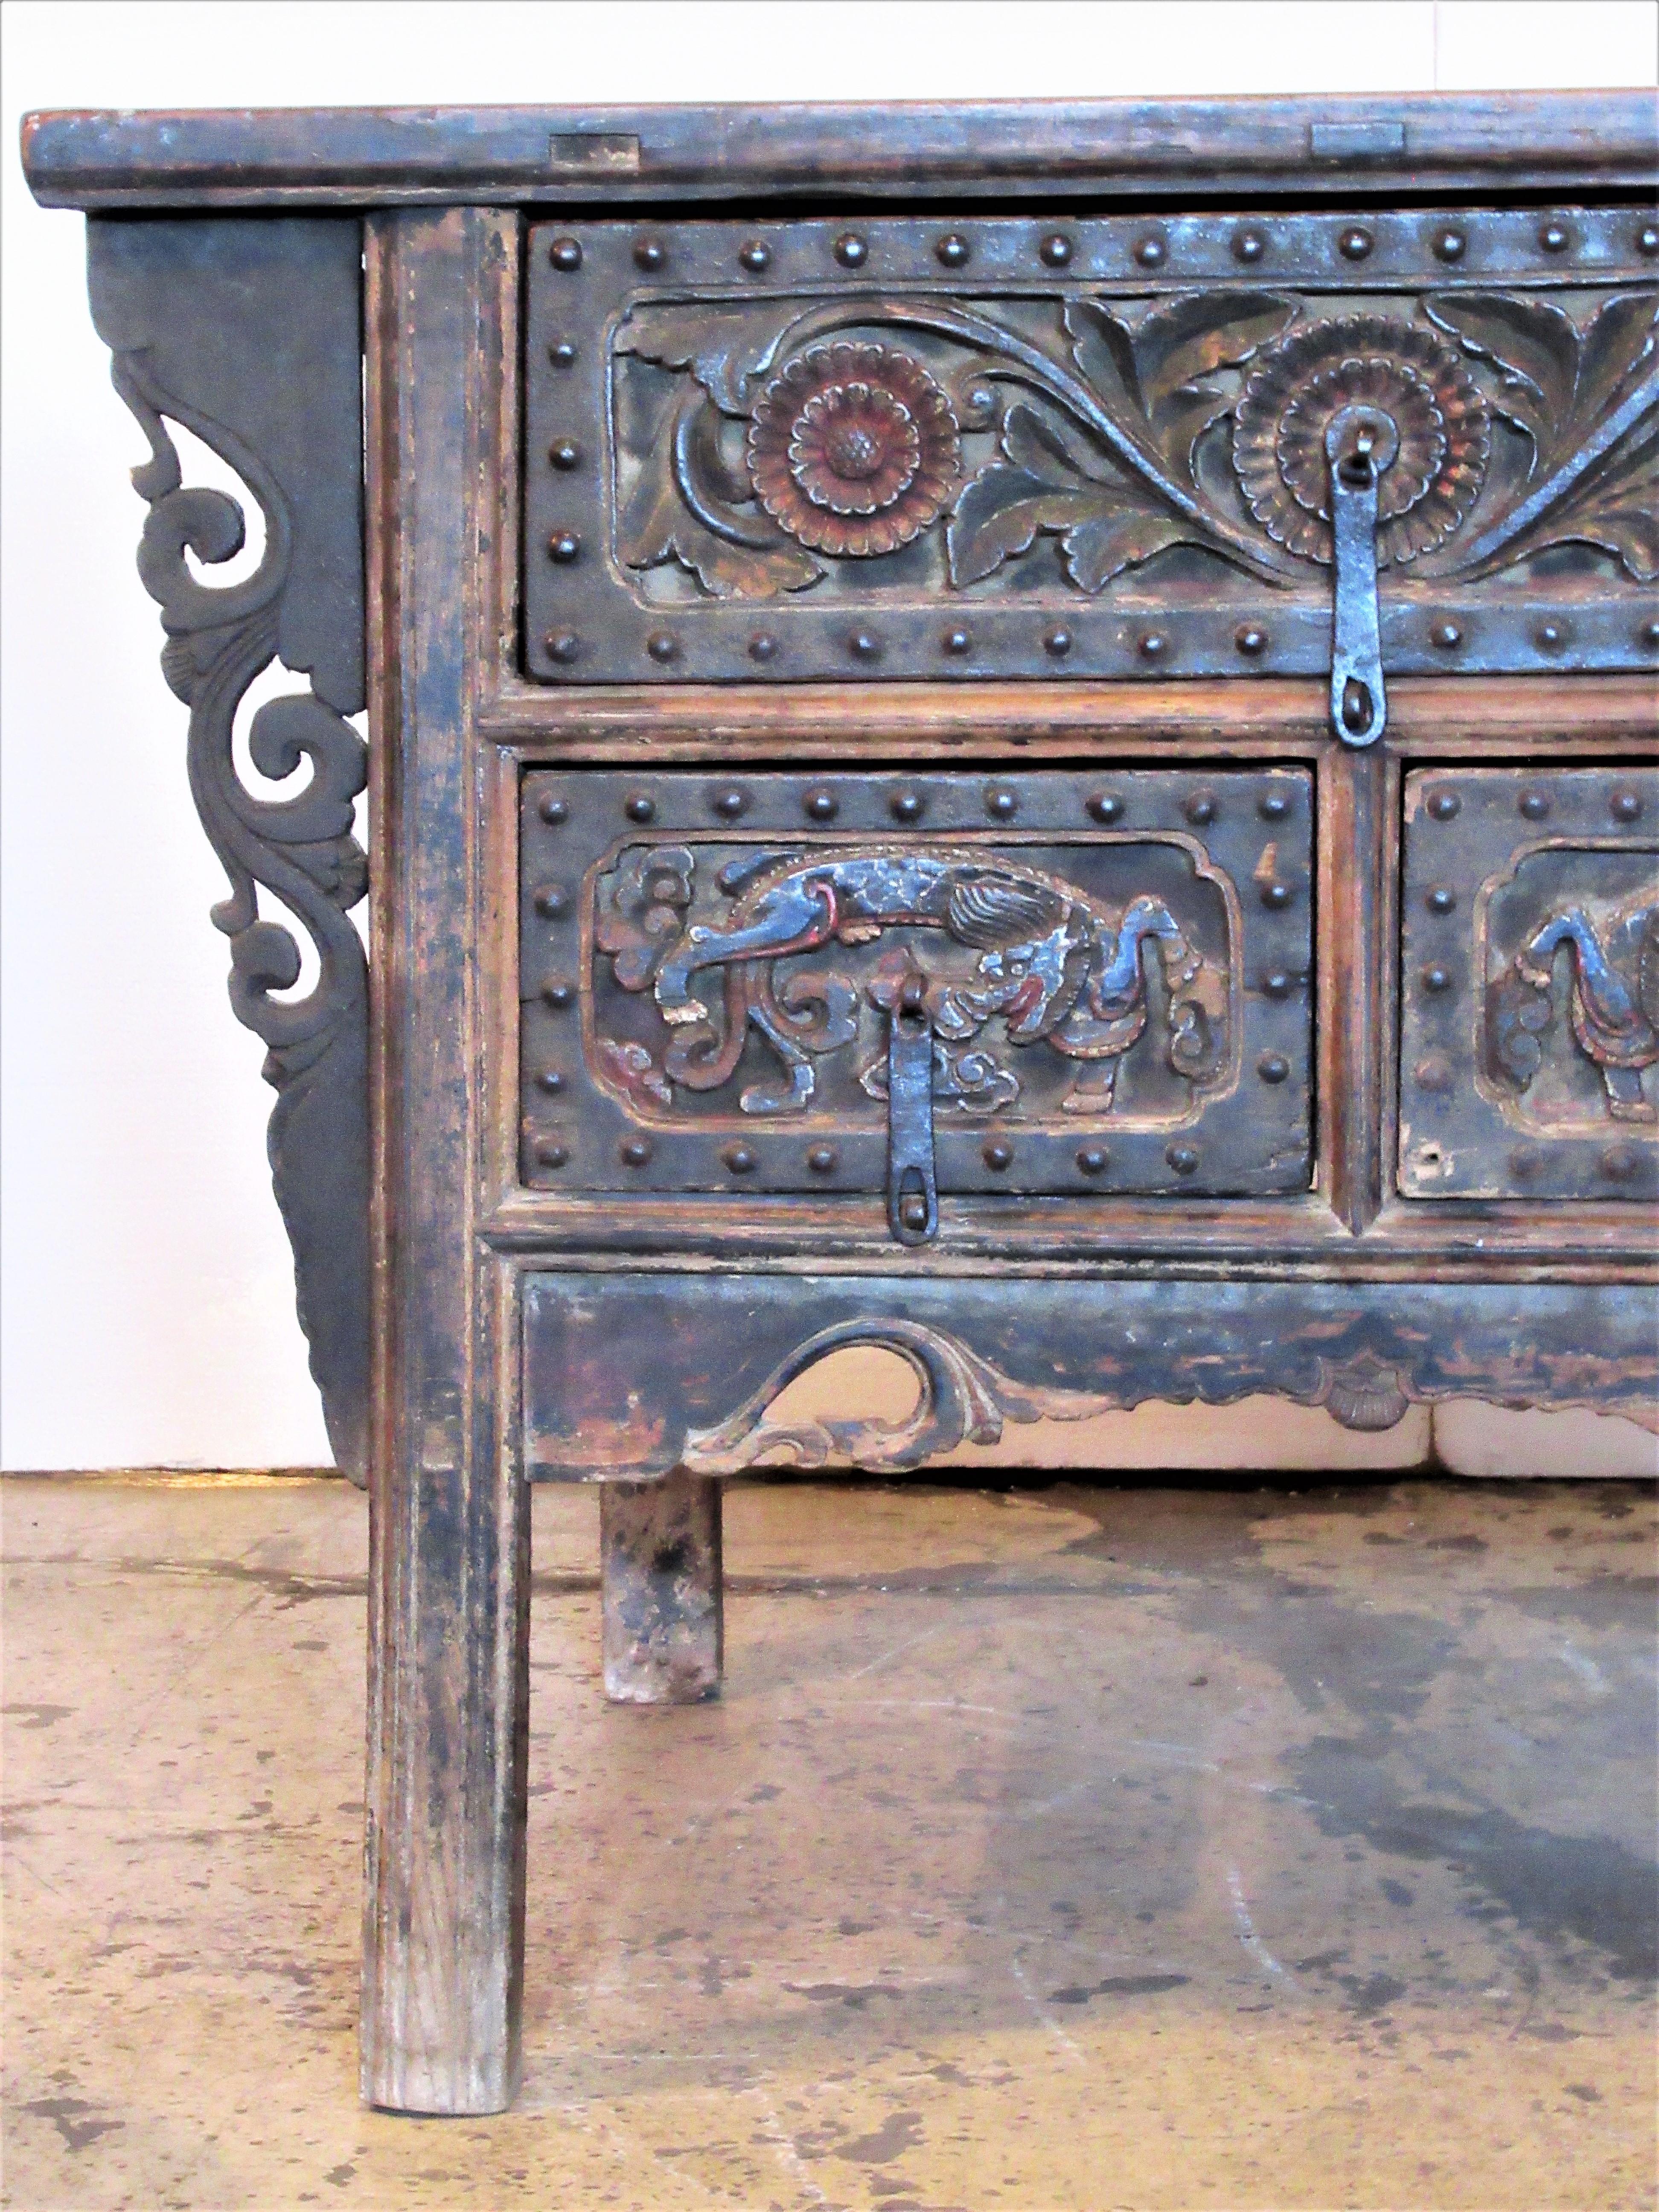 Antique 18th century Chinese hardwood winged altar coffer cabinet with fine bold carvings to the three steel riveted front drawer panels and overall beautifully aged patina color to elm wood and polychrome painted surface. All early case